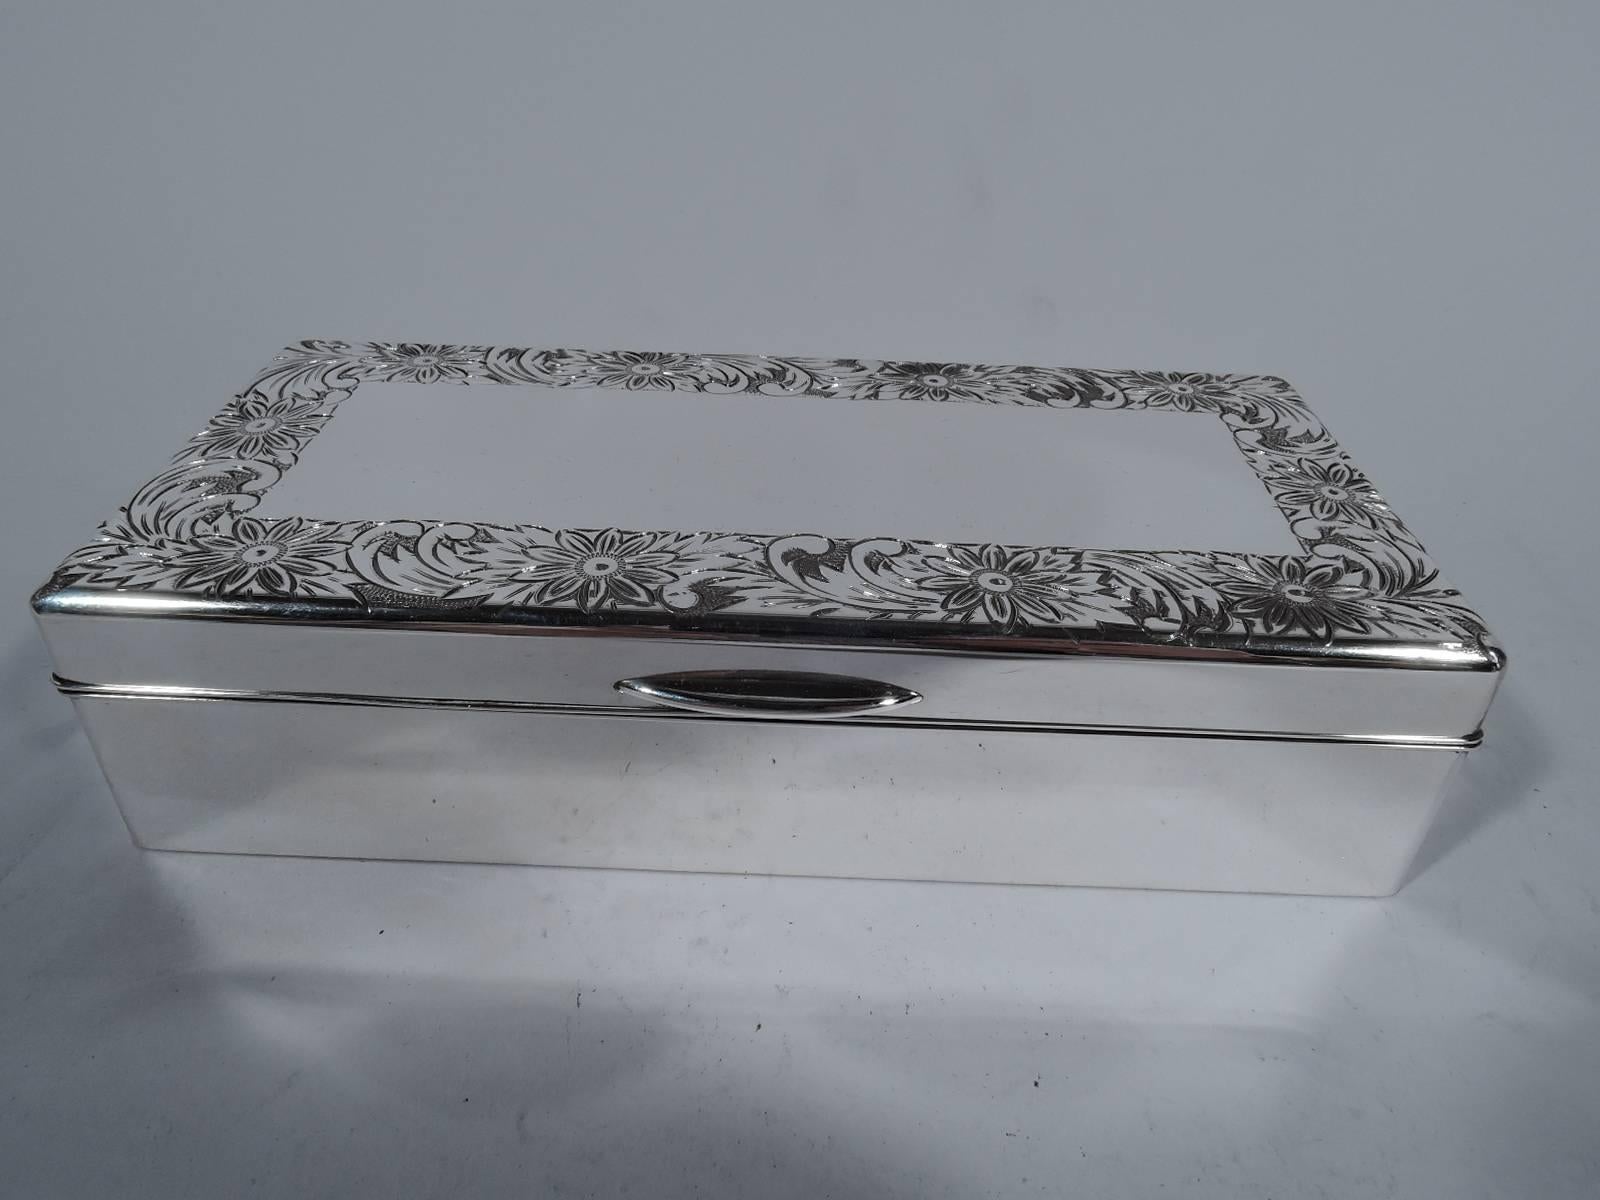 Lovely sterling silver keepsake box. Rectangular with straight sides. Cover hinged and tabbed. Cover top has engraved border with dense and overlapping flowers and leaves. Stained-wood bottom, lining, and partition. Cover interior has rectangular